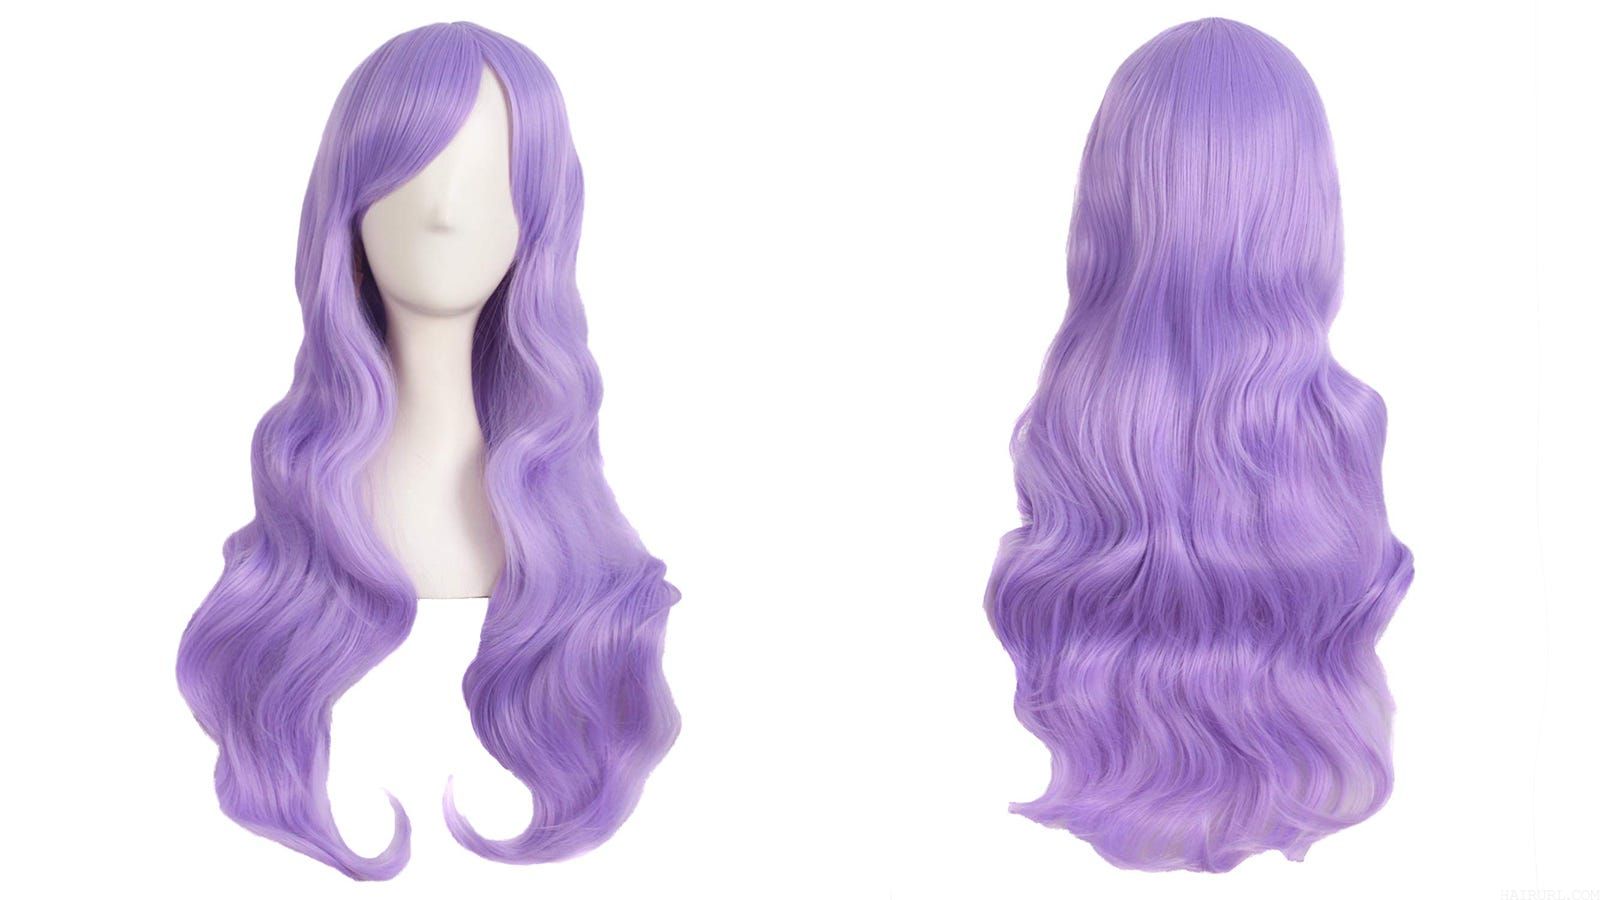 Snag this affordable MapofBeauty wig in multiple colors.